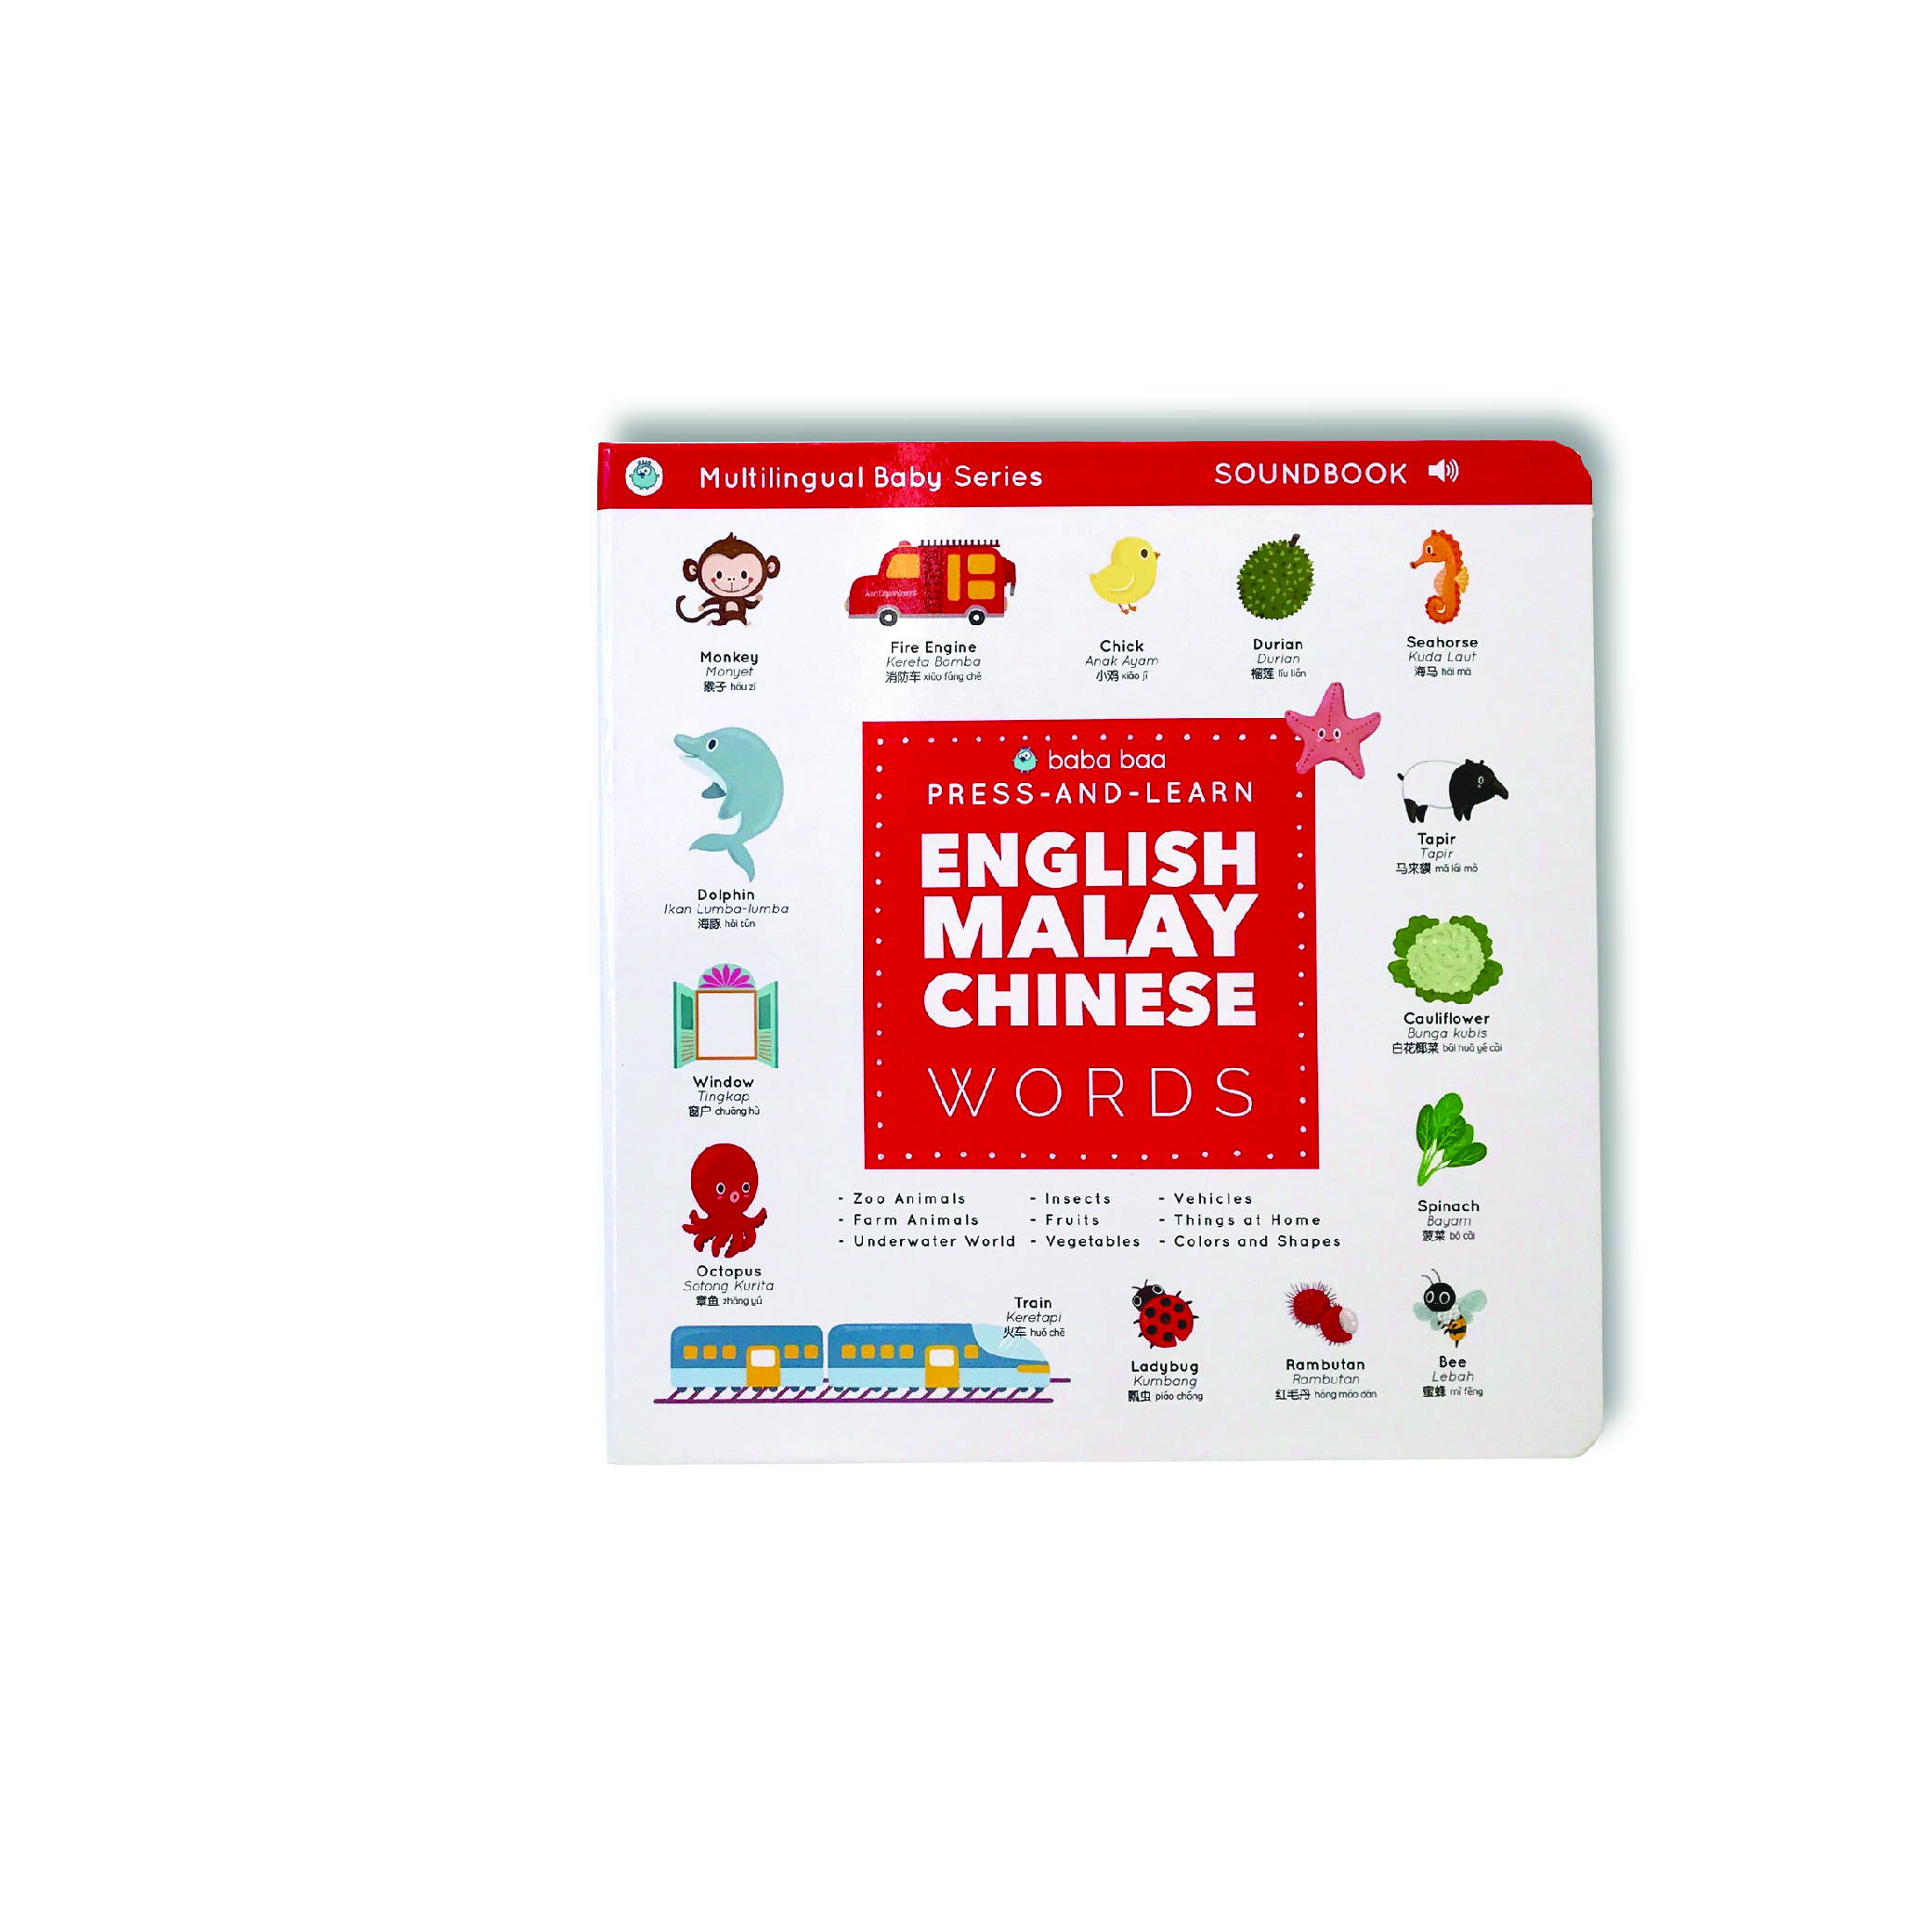 Press and Learn English Malay Chinese